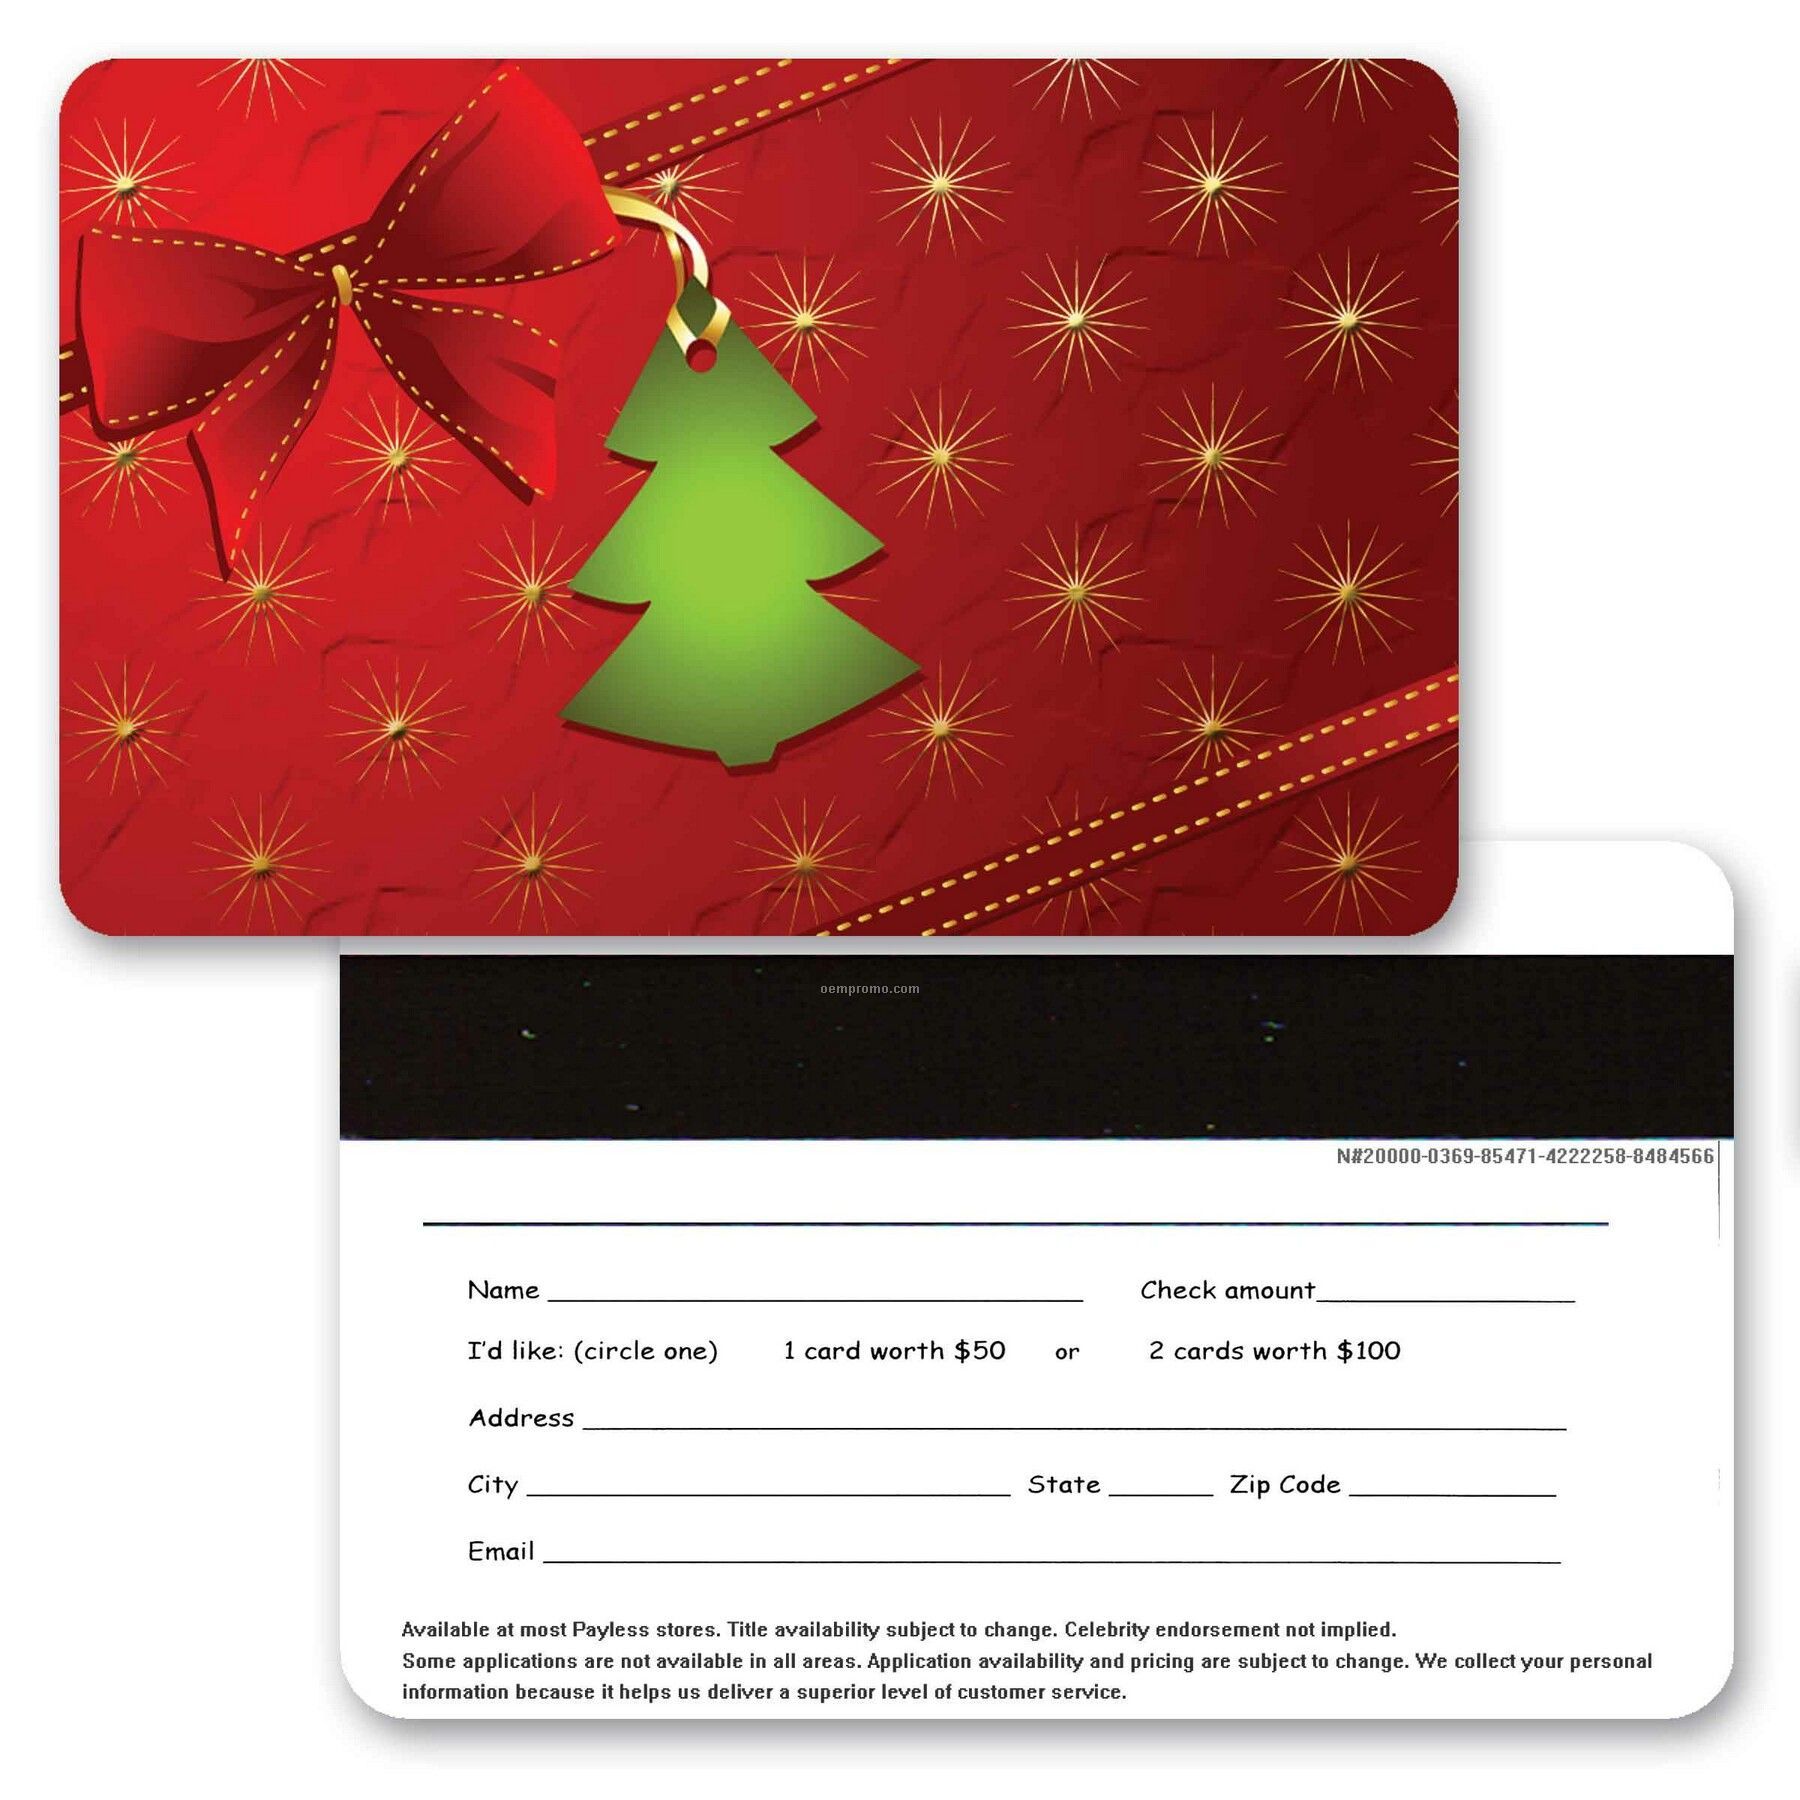 3d Lenticular Gift Card W/Christmas Decorations Images (Blanks)